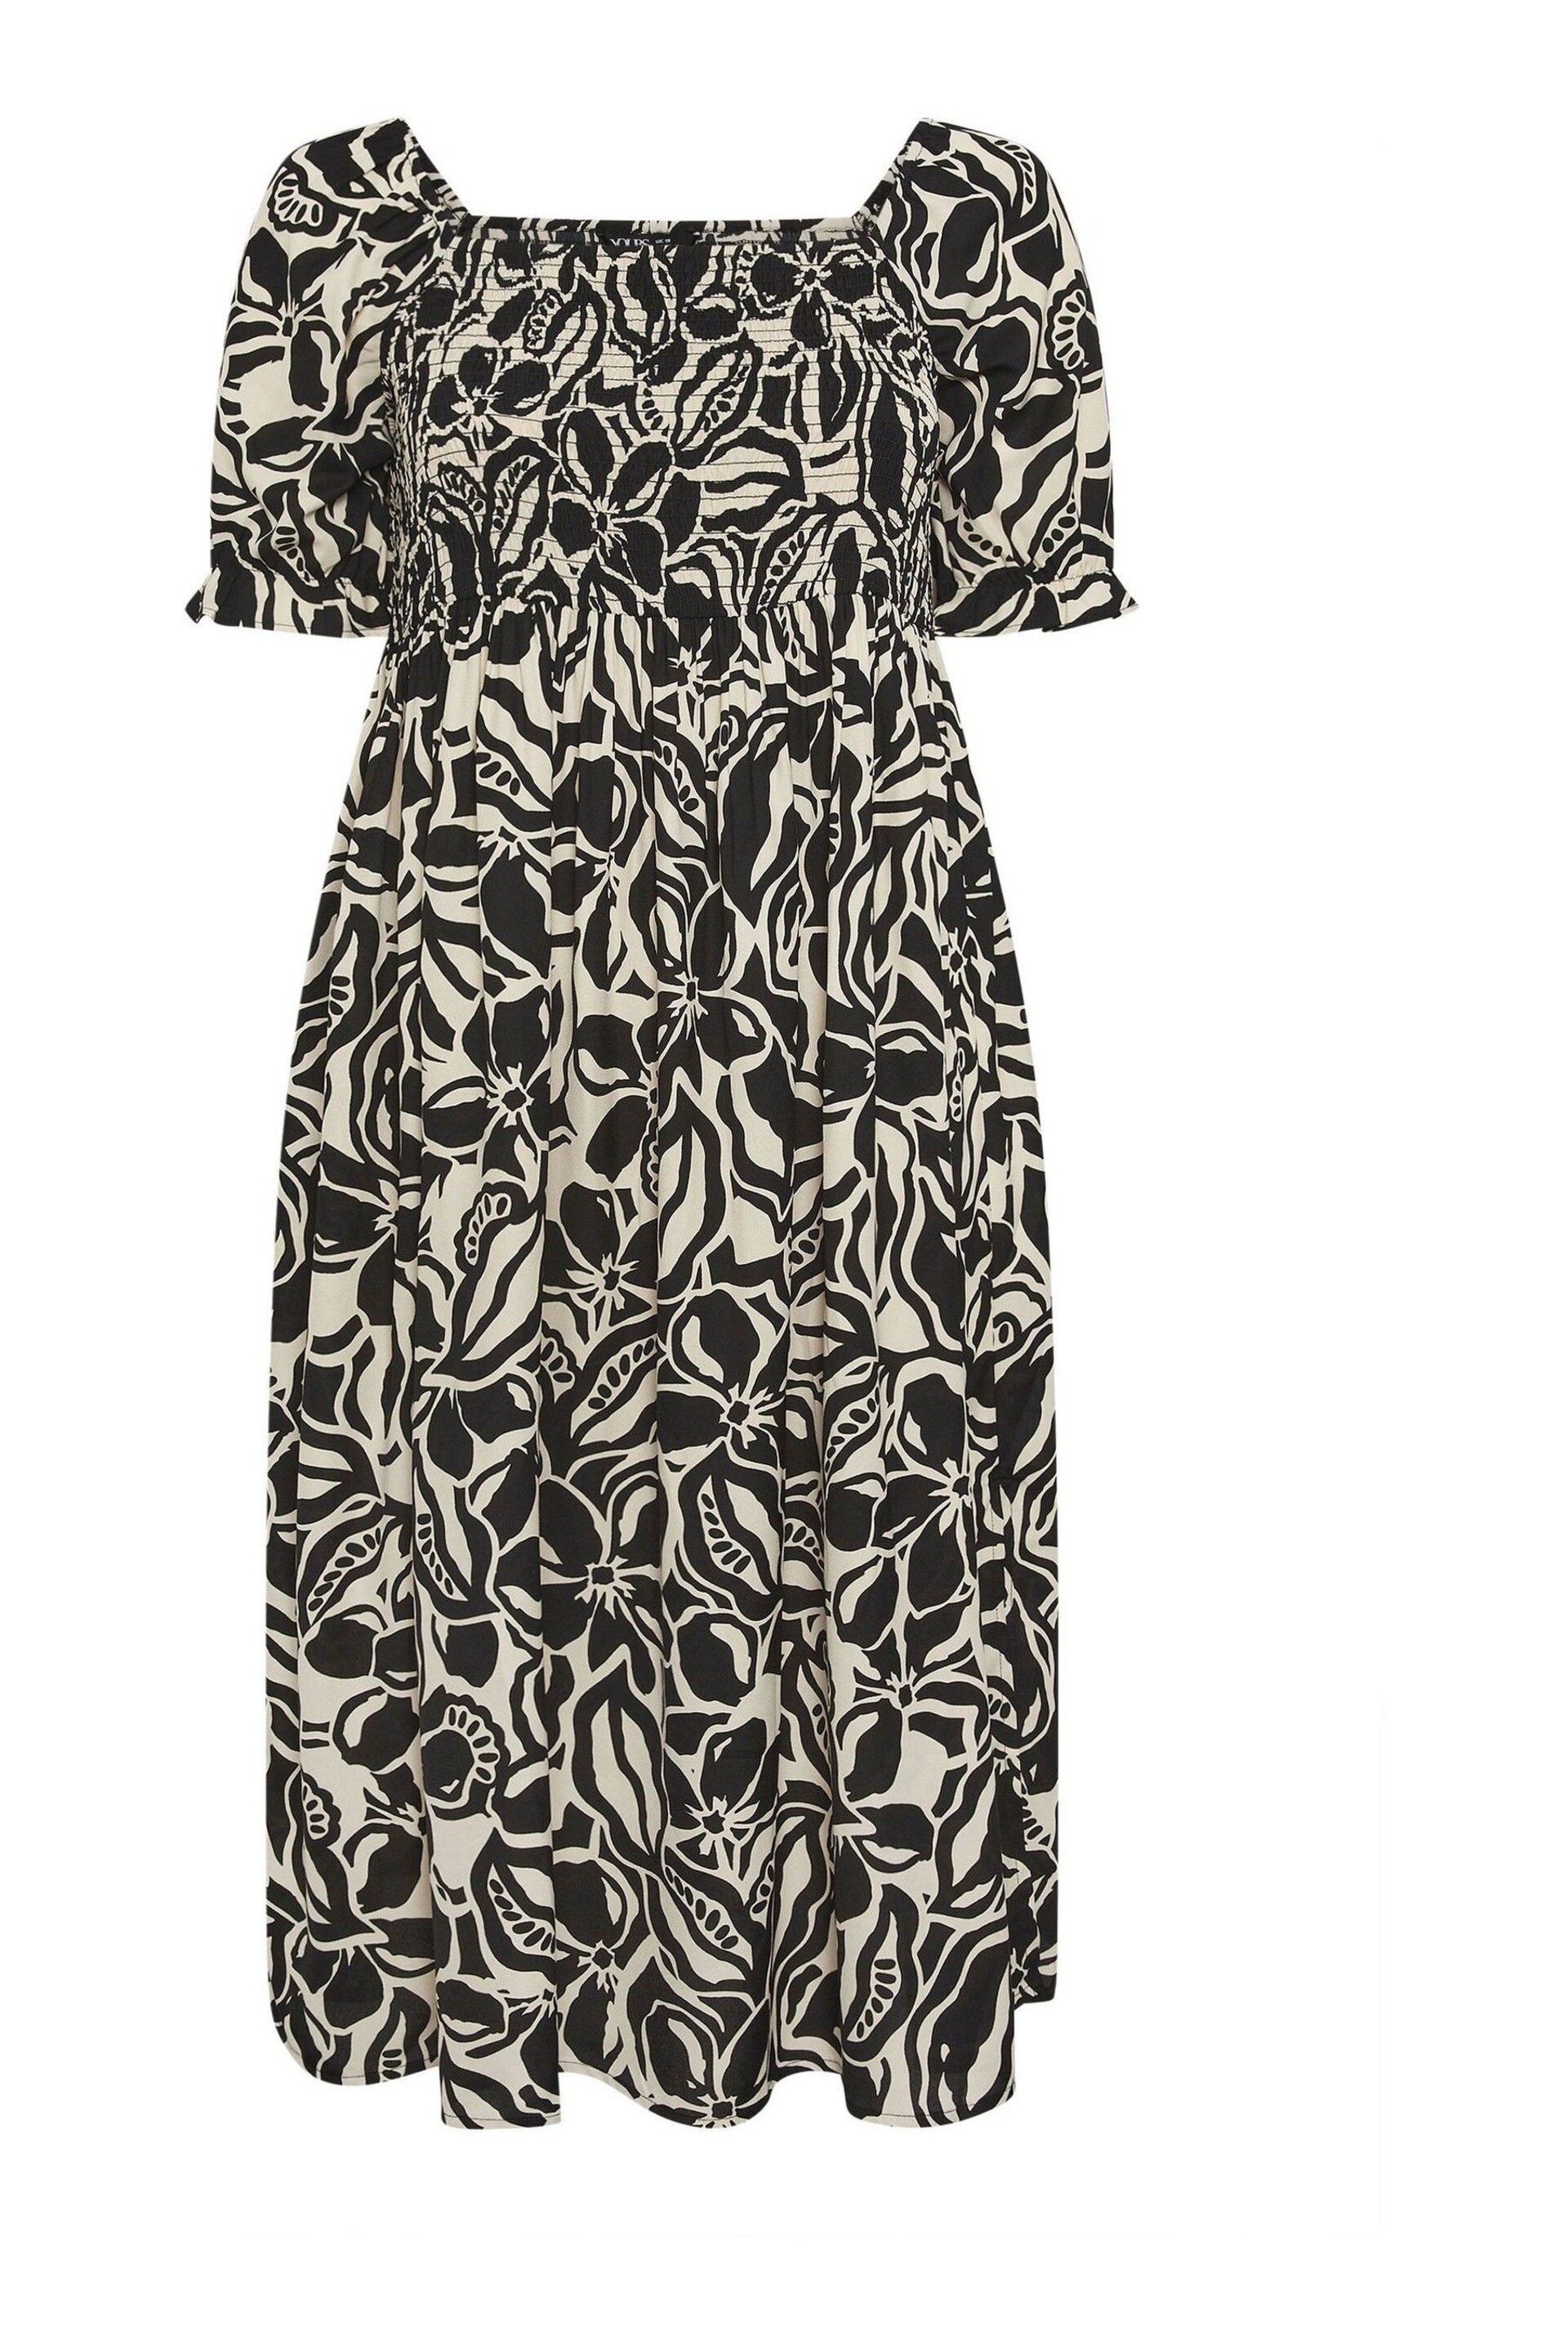 Yours Curve Black Abstract Floral Print Shirred Midi Dress - Image 6 of 6